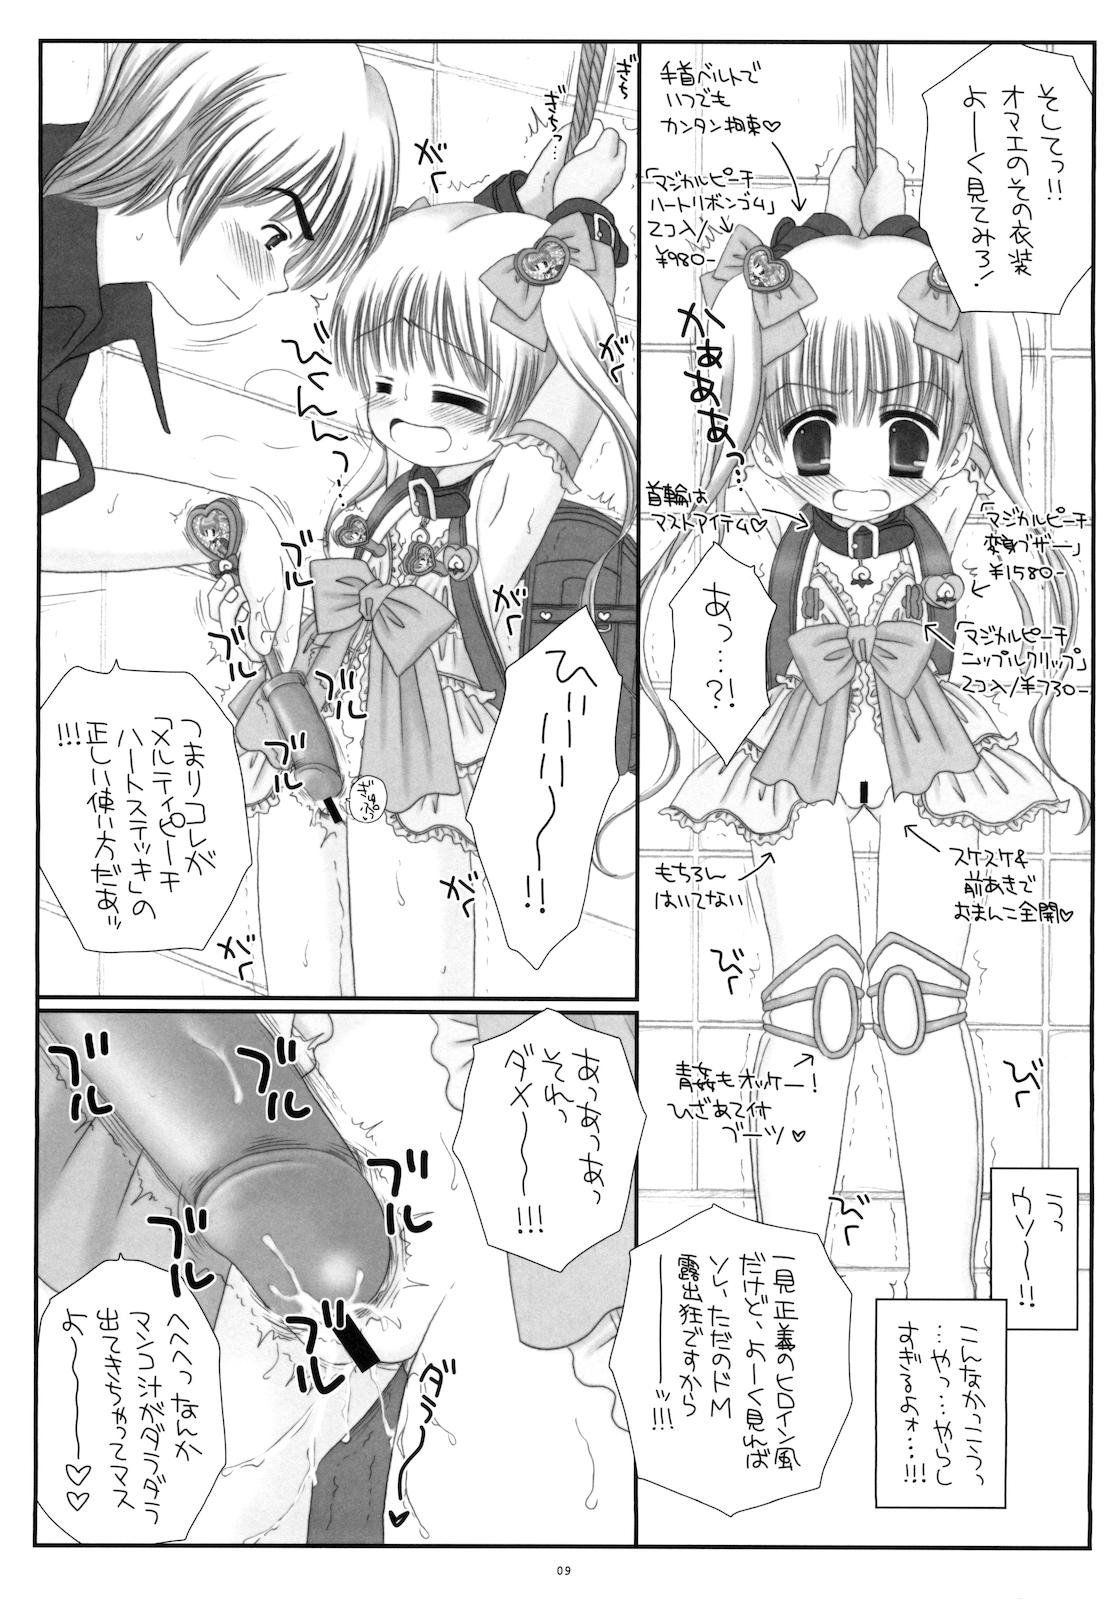 Best Blow Jobs Ever Round Shell Mahou Shoujo Melty Peach Price - Page 11